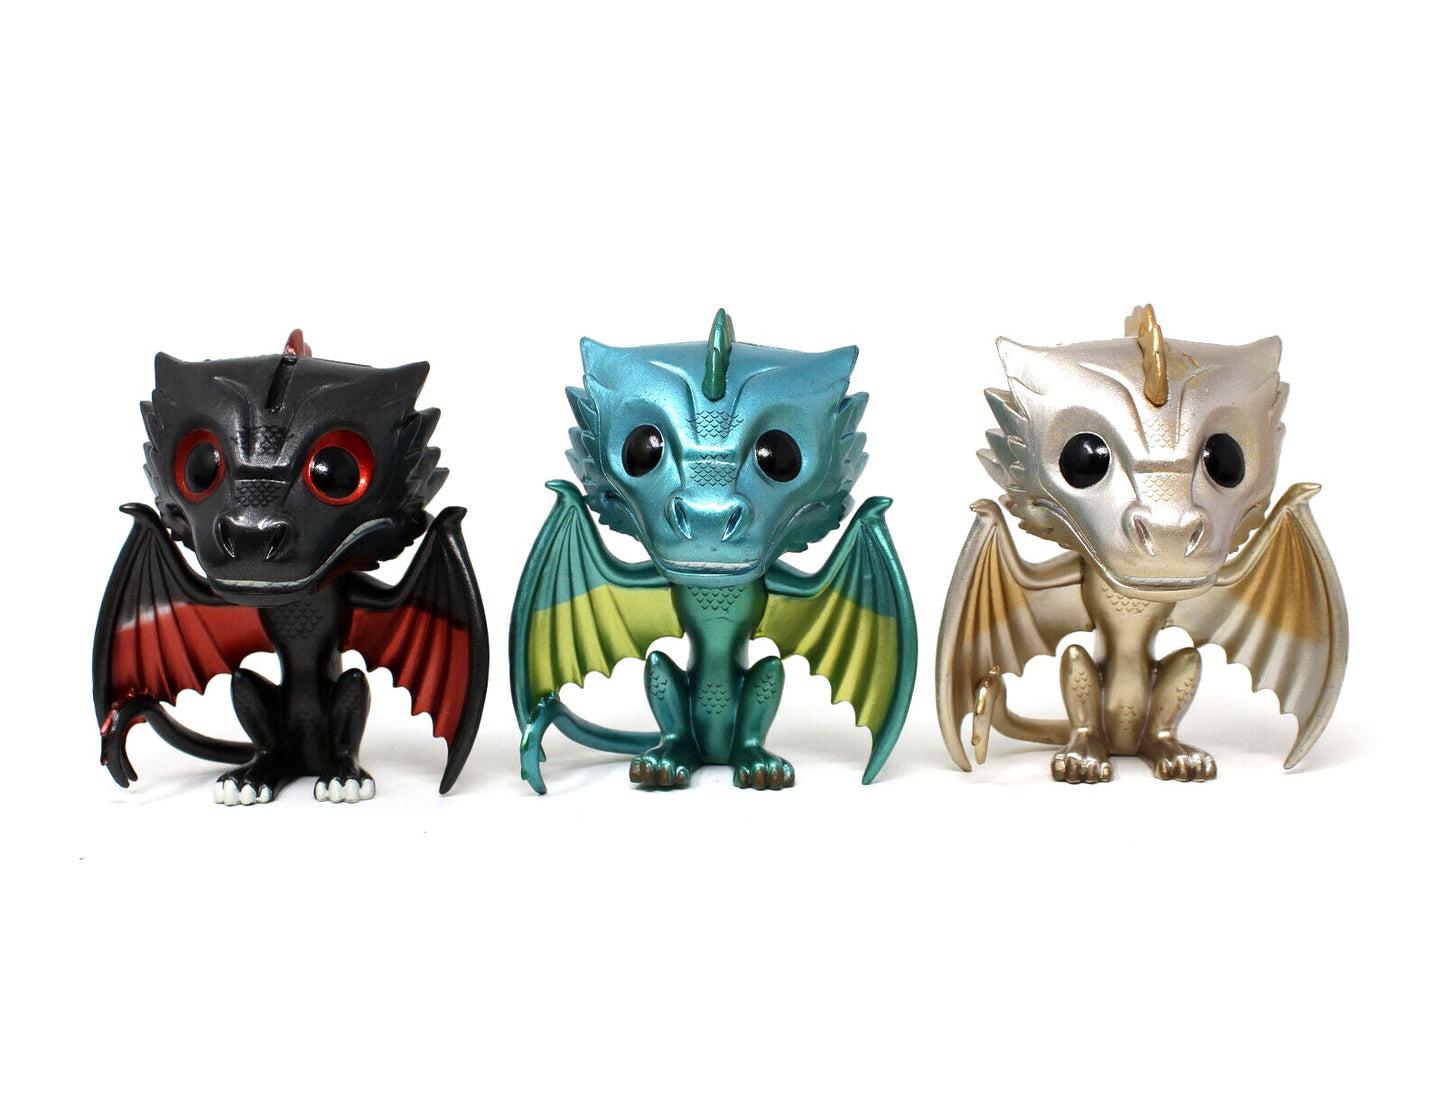 FUNKO POP! GAME OF THRONES FIGURES 3-PACK -DROGON, RHAEGAL & VISERION (METALLIC) - Anotoys Collectibles